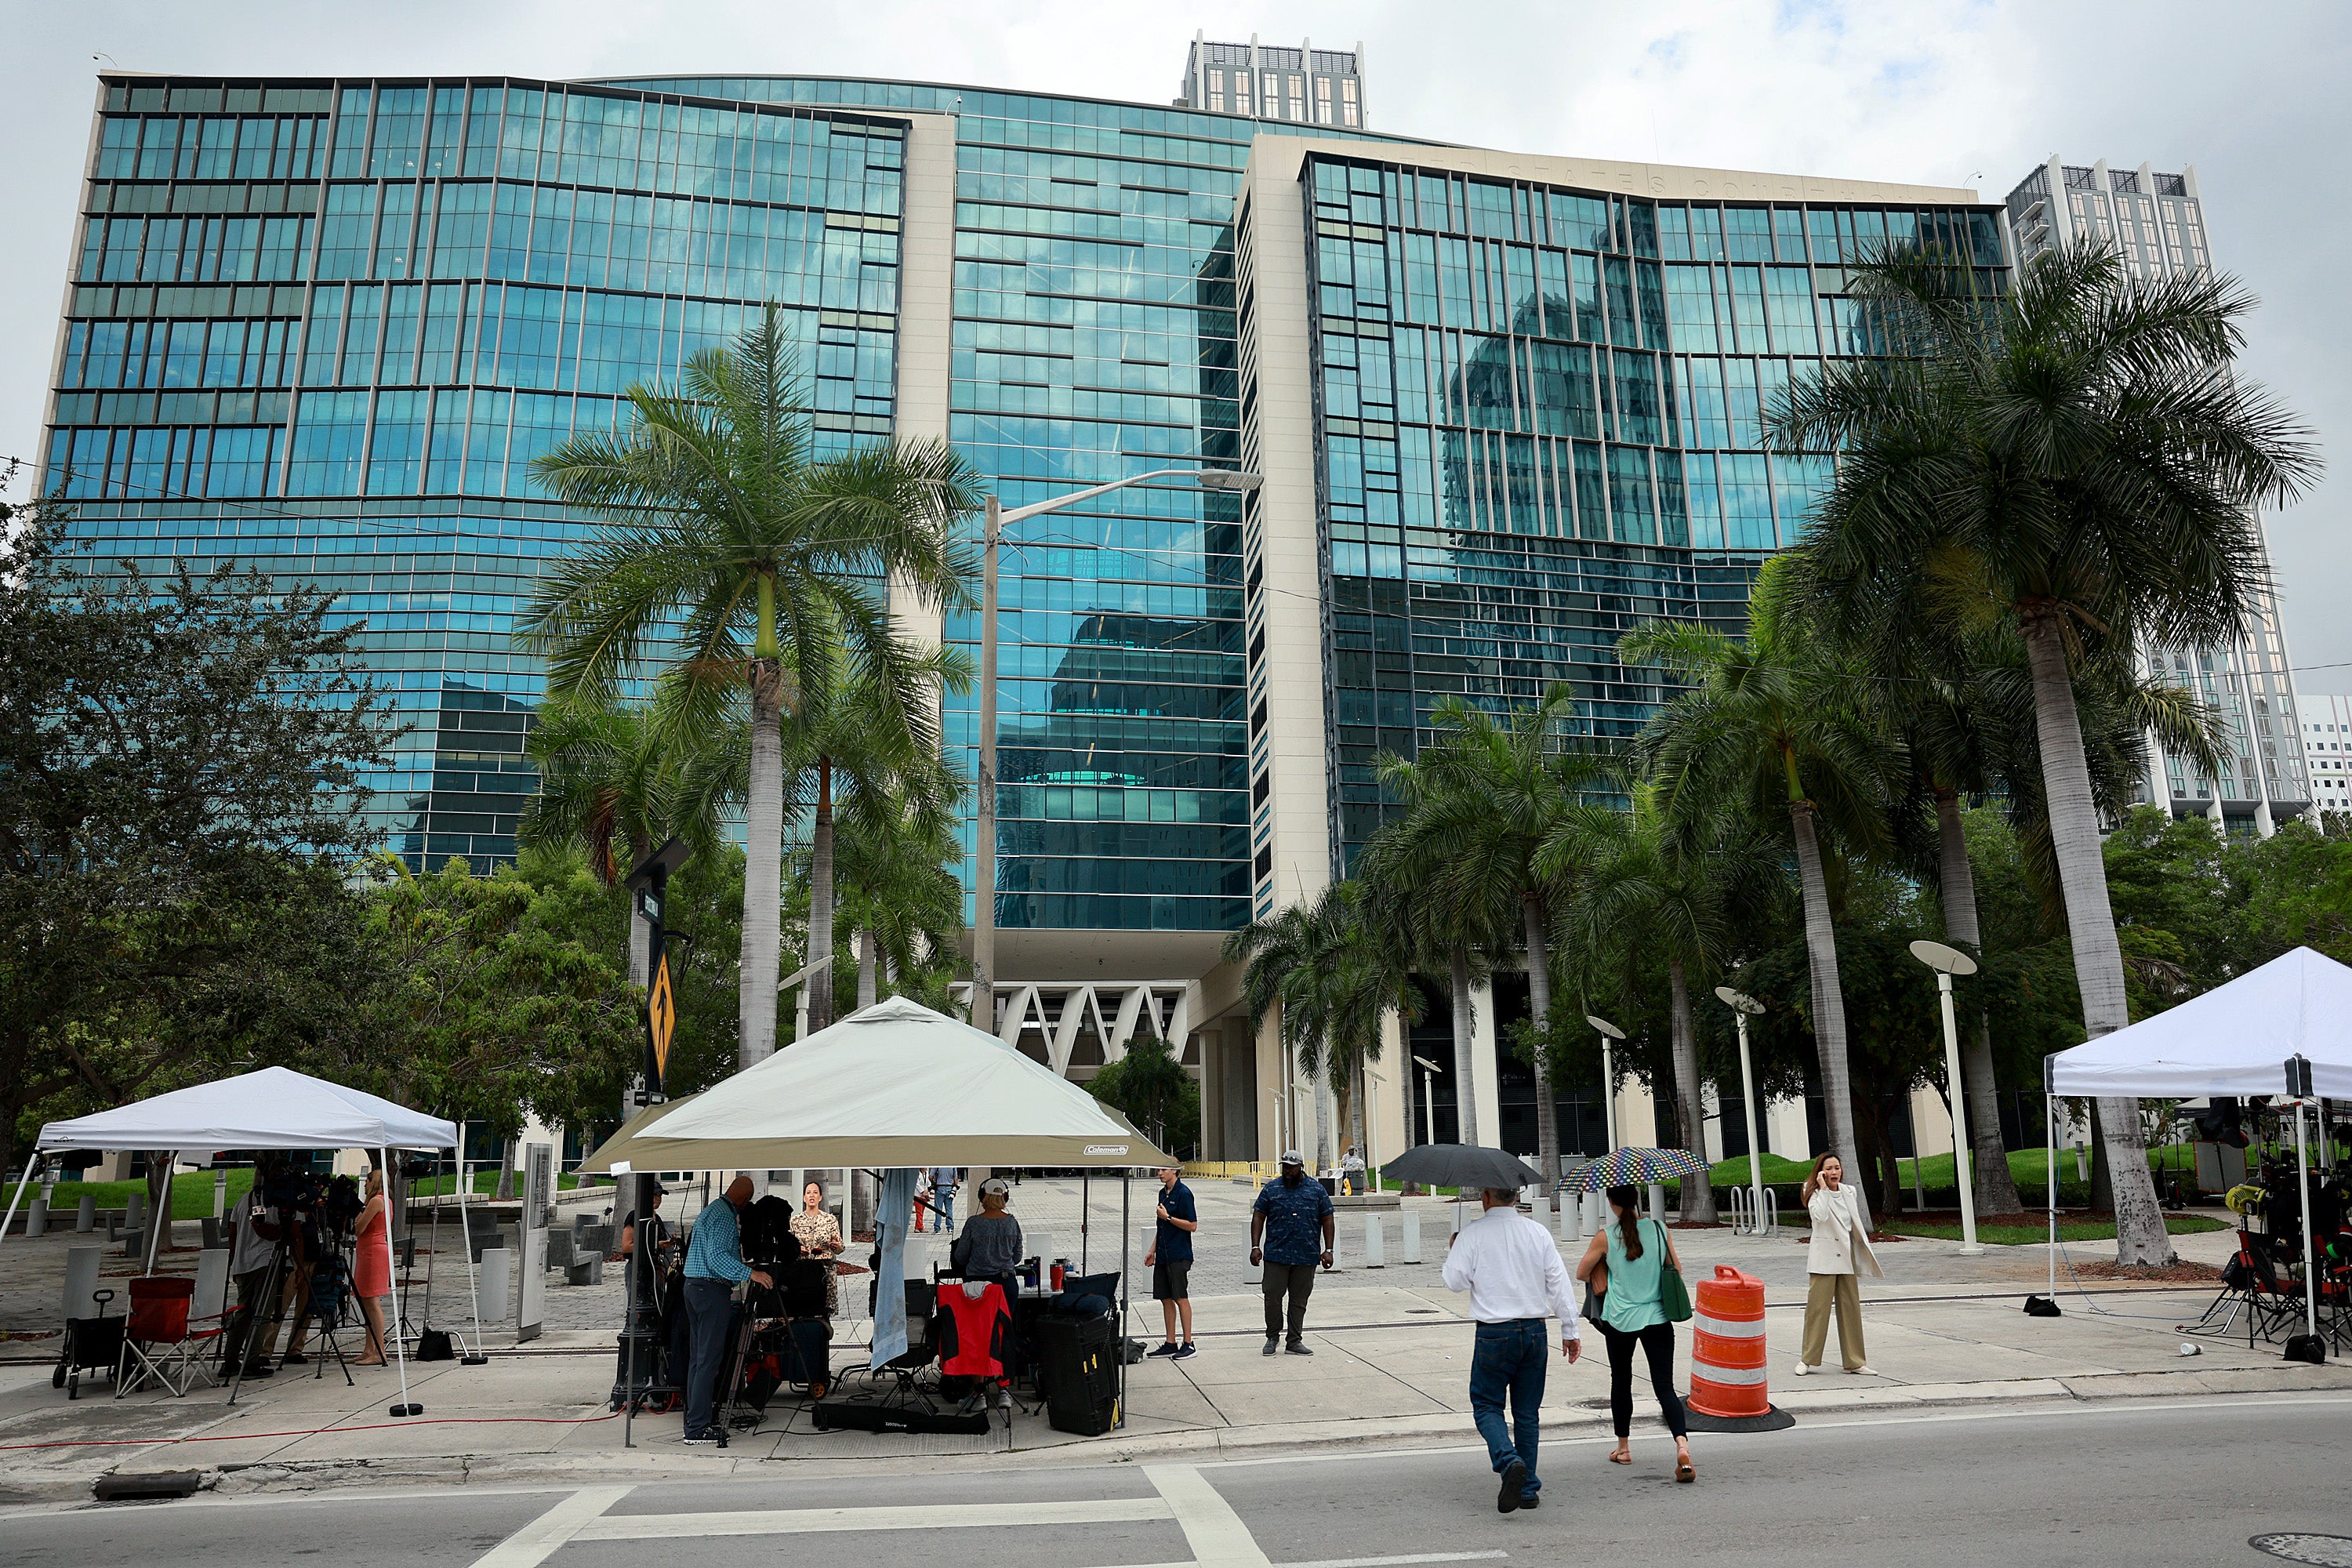 News crews camp out in front of a federal court building in Miami anticipating Donald Trump’s arrival after a federal indictment was unsealed on 9 June